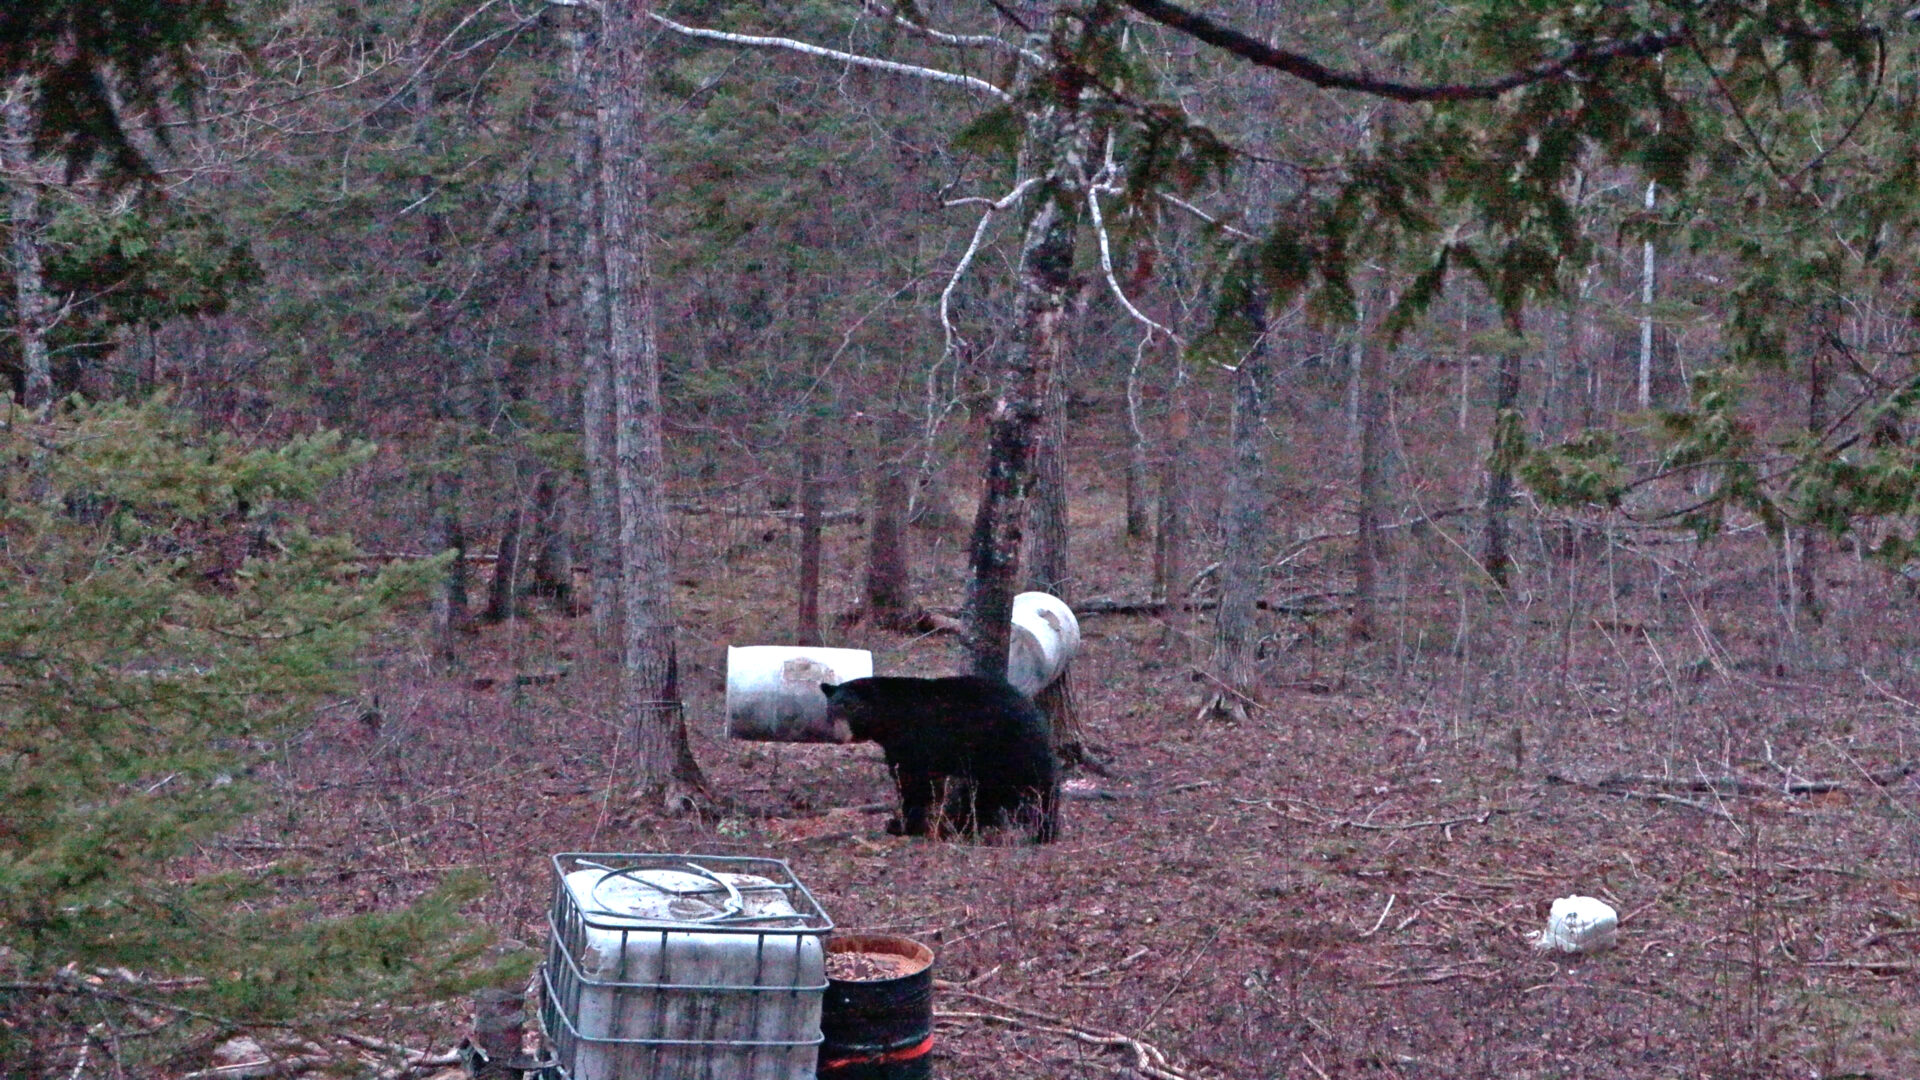 A black bear walking through the woods near some trees.